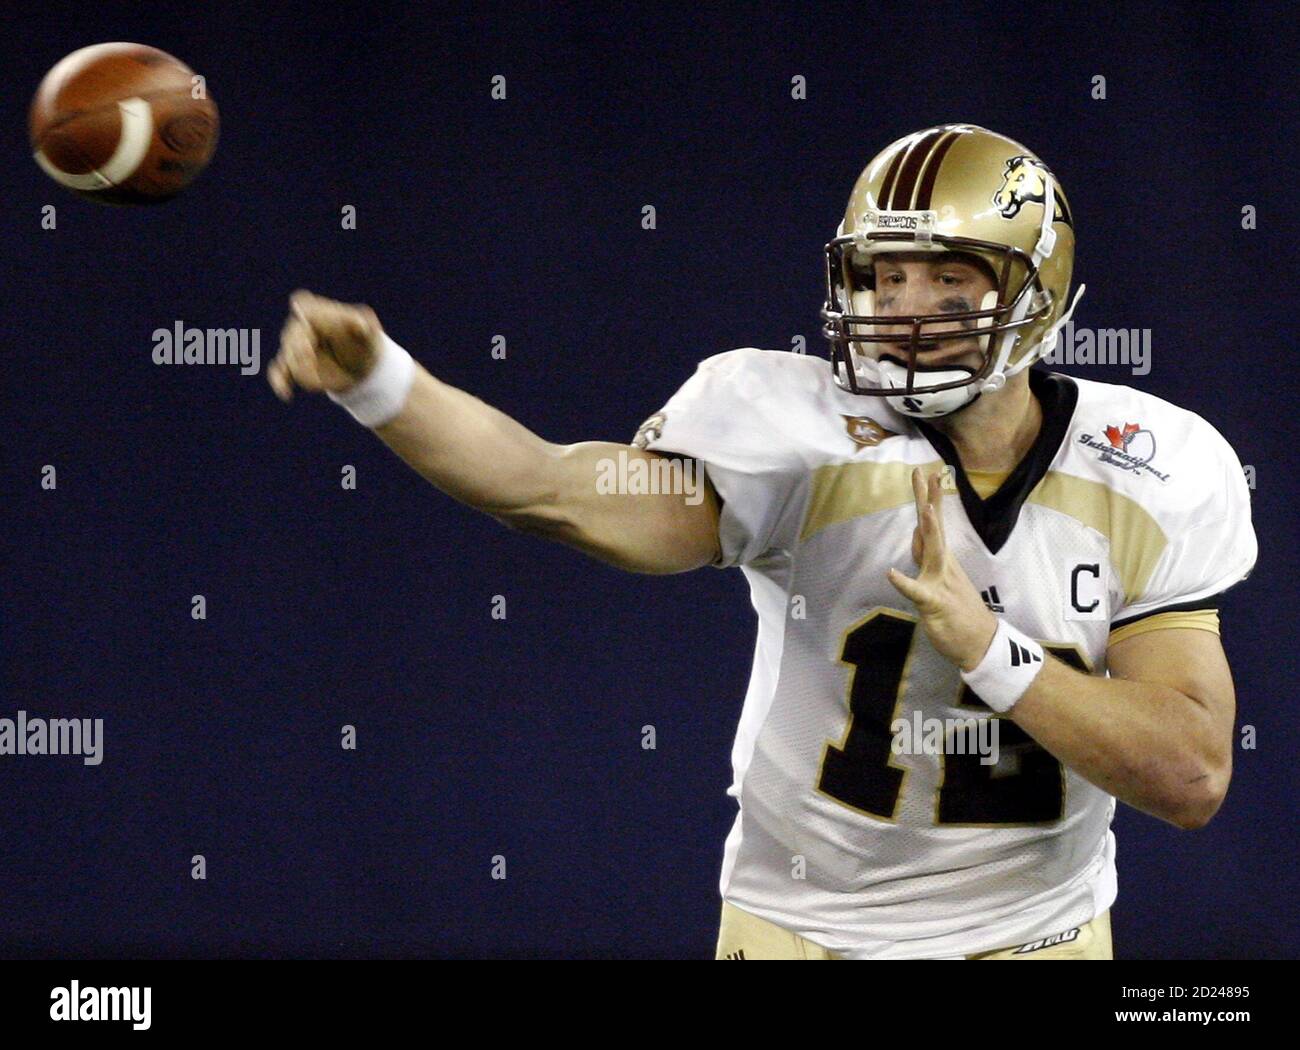 Western Michigan University Broncos quarterback Ryan Cubit throws a pass against the University of Cincinnati Bearcats during the second half of the inaugural NCAA International Bowl football game in Toronto January 6, 2007.    REUTERS/Mike Cassese   (CANADA) Stock Photo